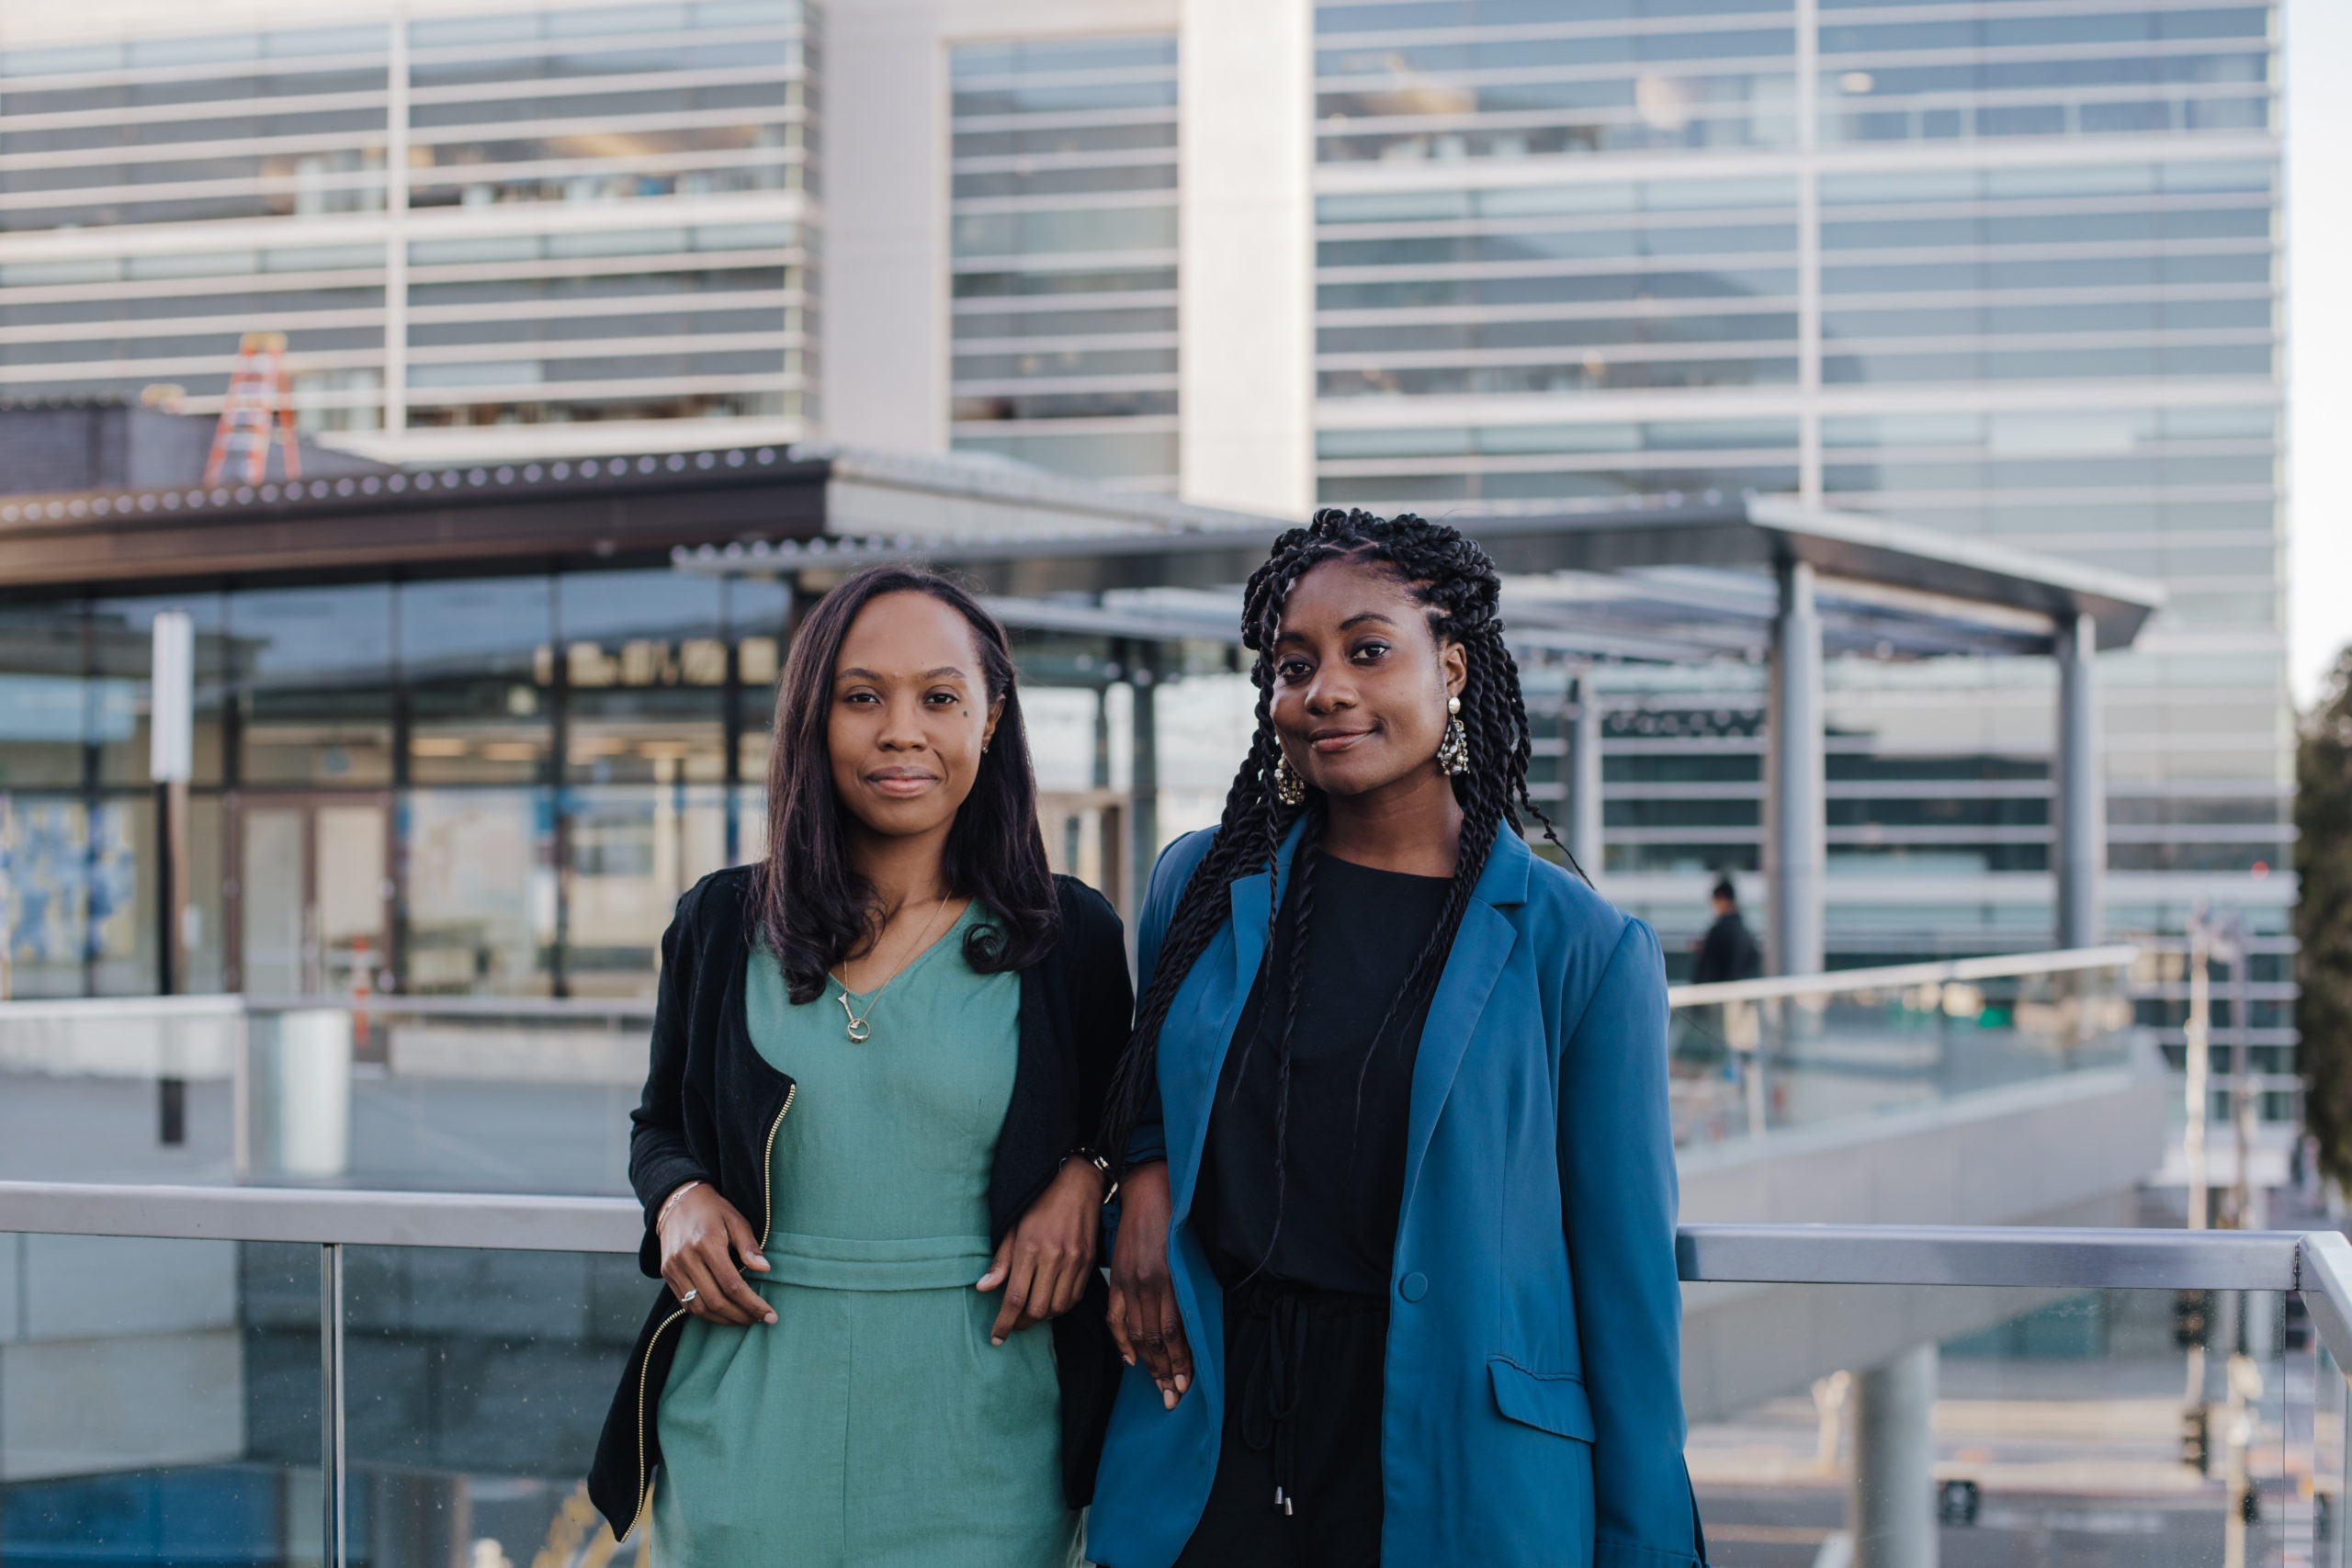 Edlyft co-founder and CEO Erika Hairston, Edlyft co-founder and CTO Arnelle Ansong